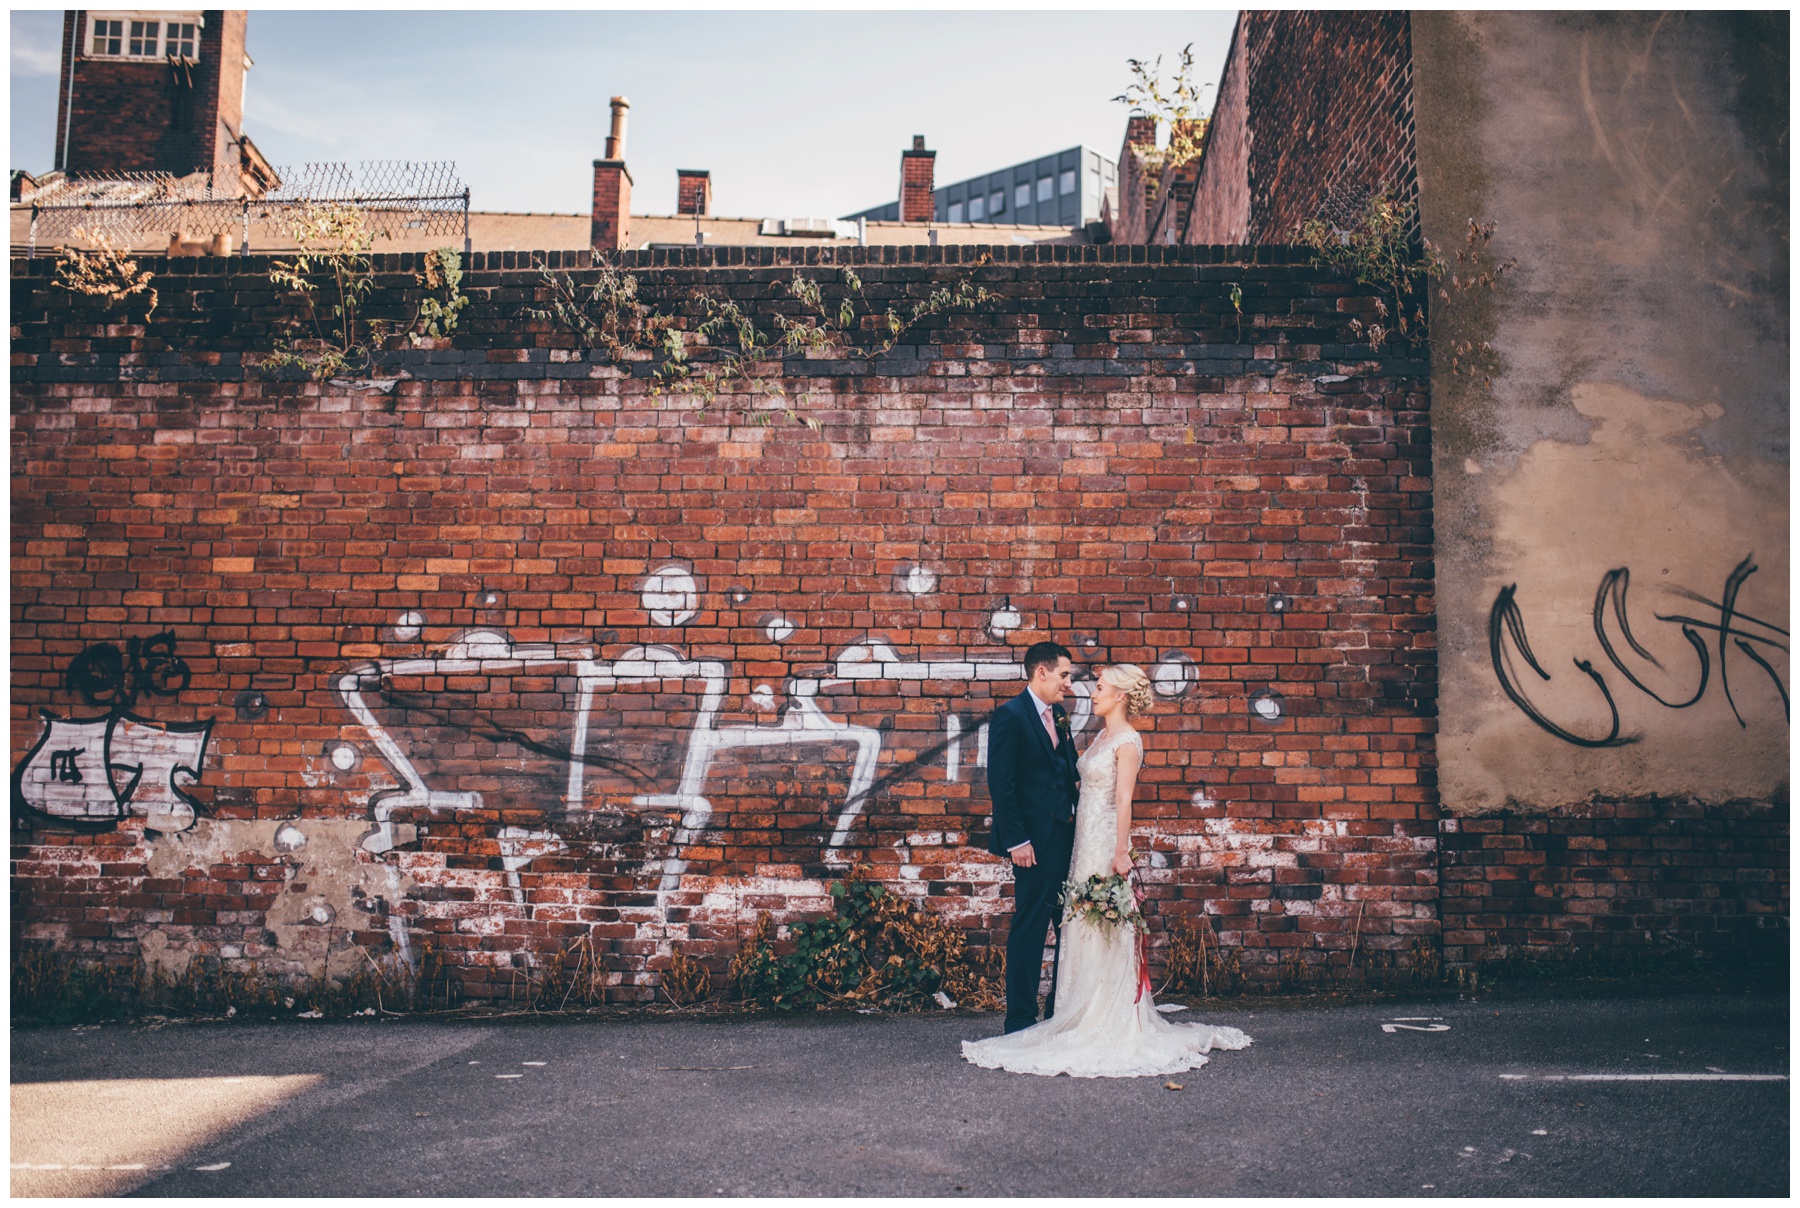 Graffiti covered car park and streets in Sheffield city centre wedding.